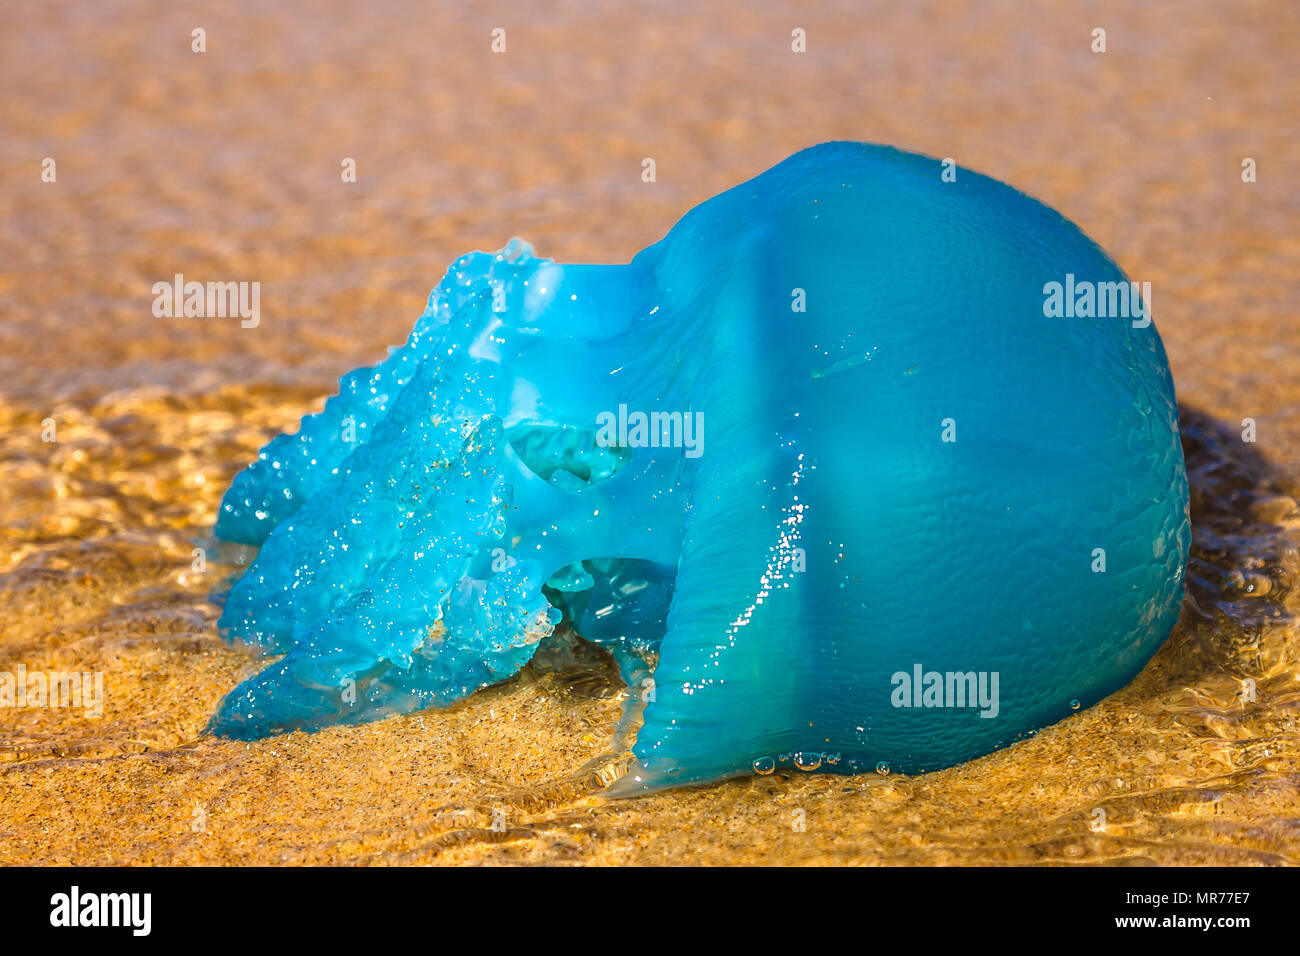 Closeup of a blue jellyfish species Velella, often spotted in the Gold Coast of Queensland in Australia and the Mediterranean Sea. on the Australian beach. Stock Photo